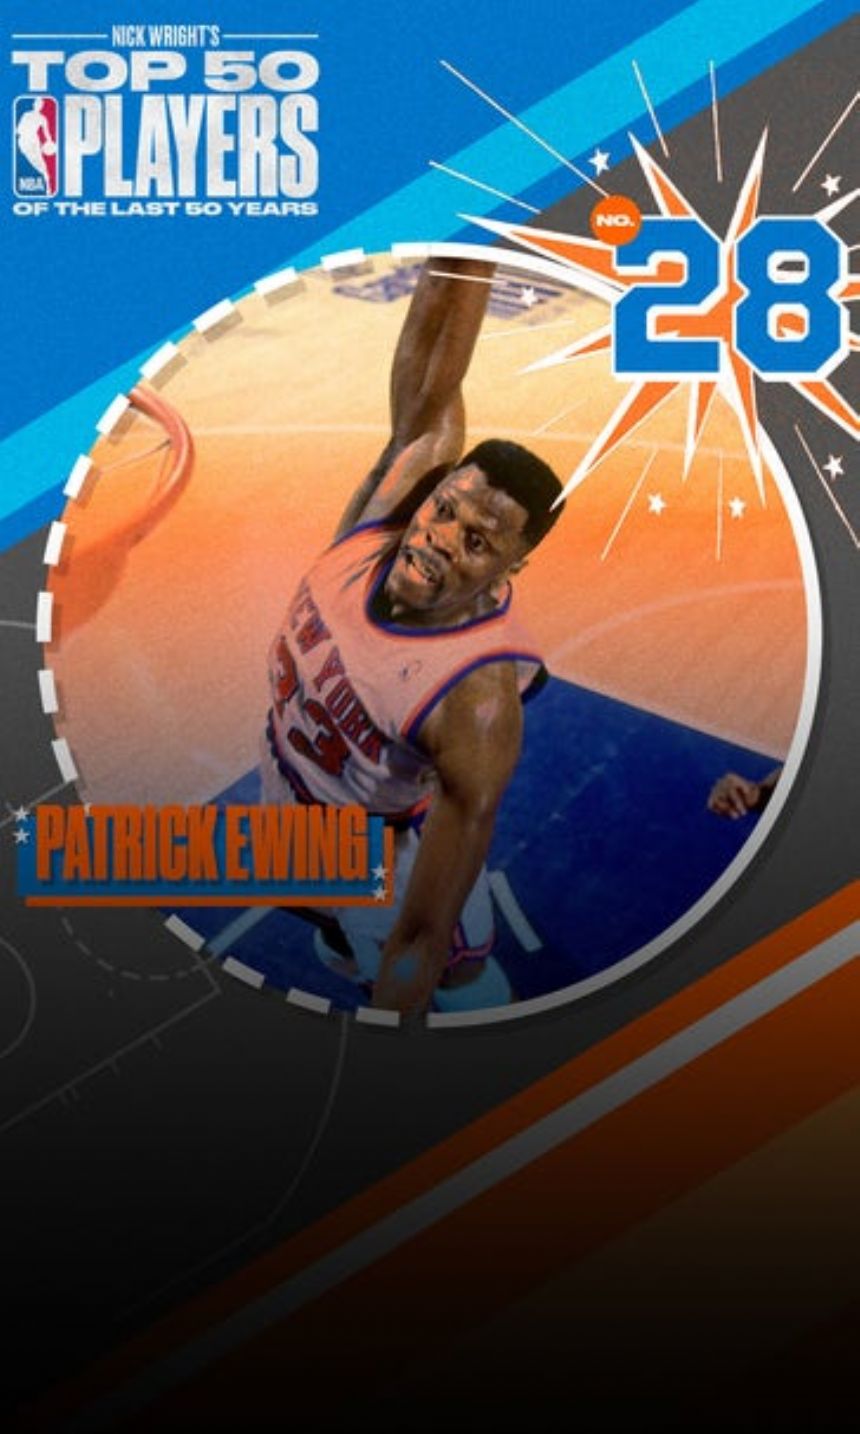 Top 50 NBA players from last 50 years: Patrick Ewing ranks No. 28